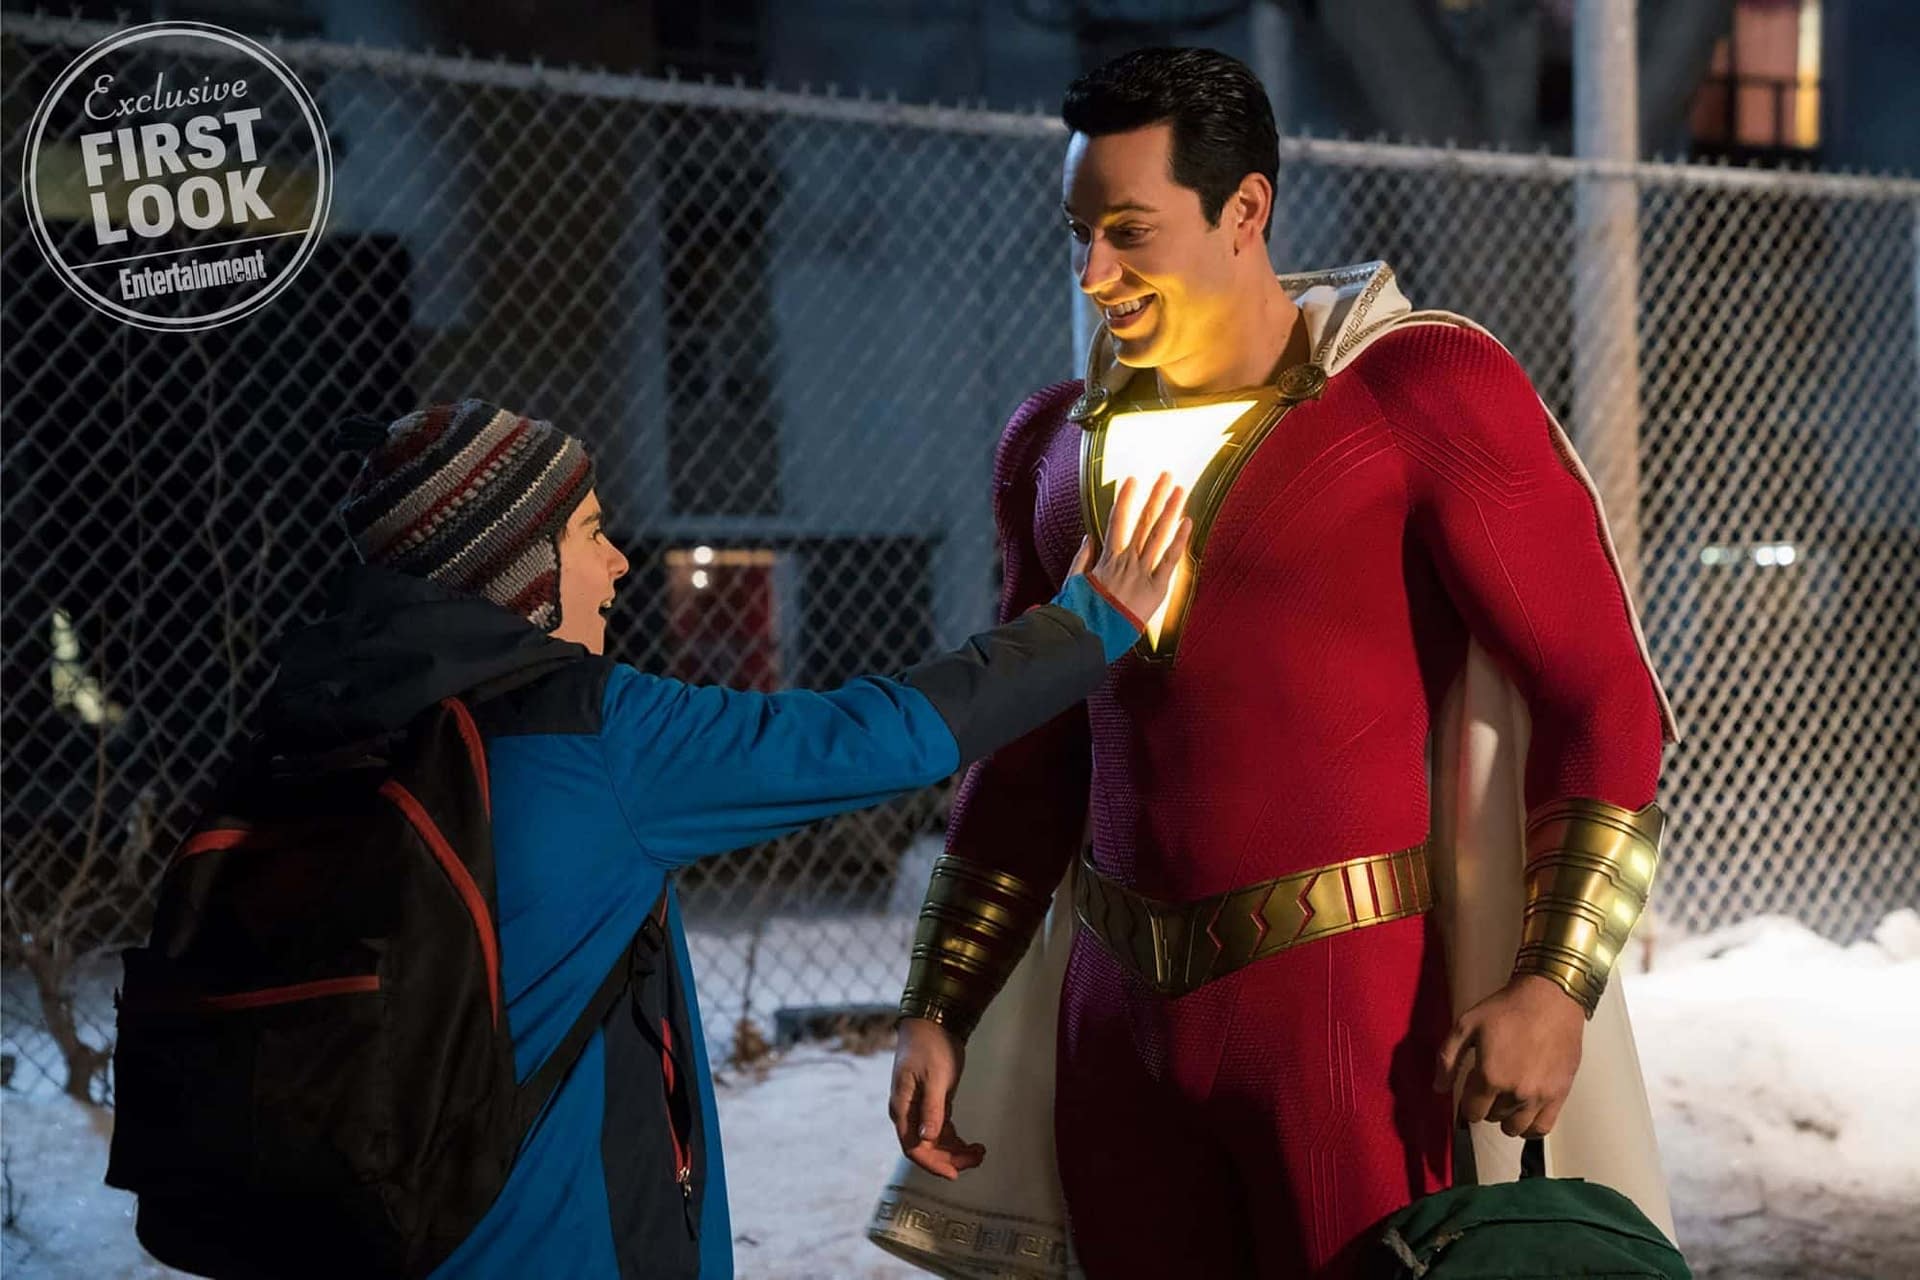 Shazam! Lights Up in New Image from the Upcoming DC Movie